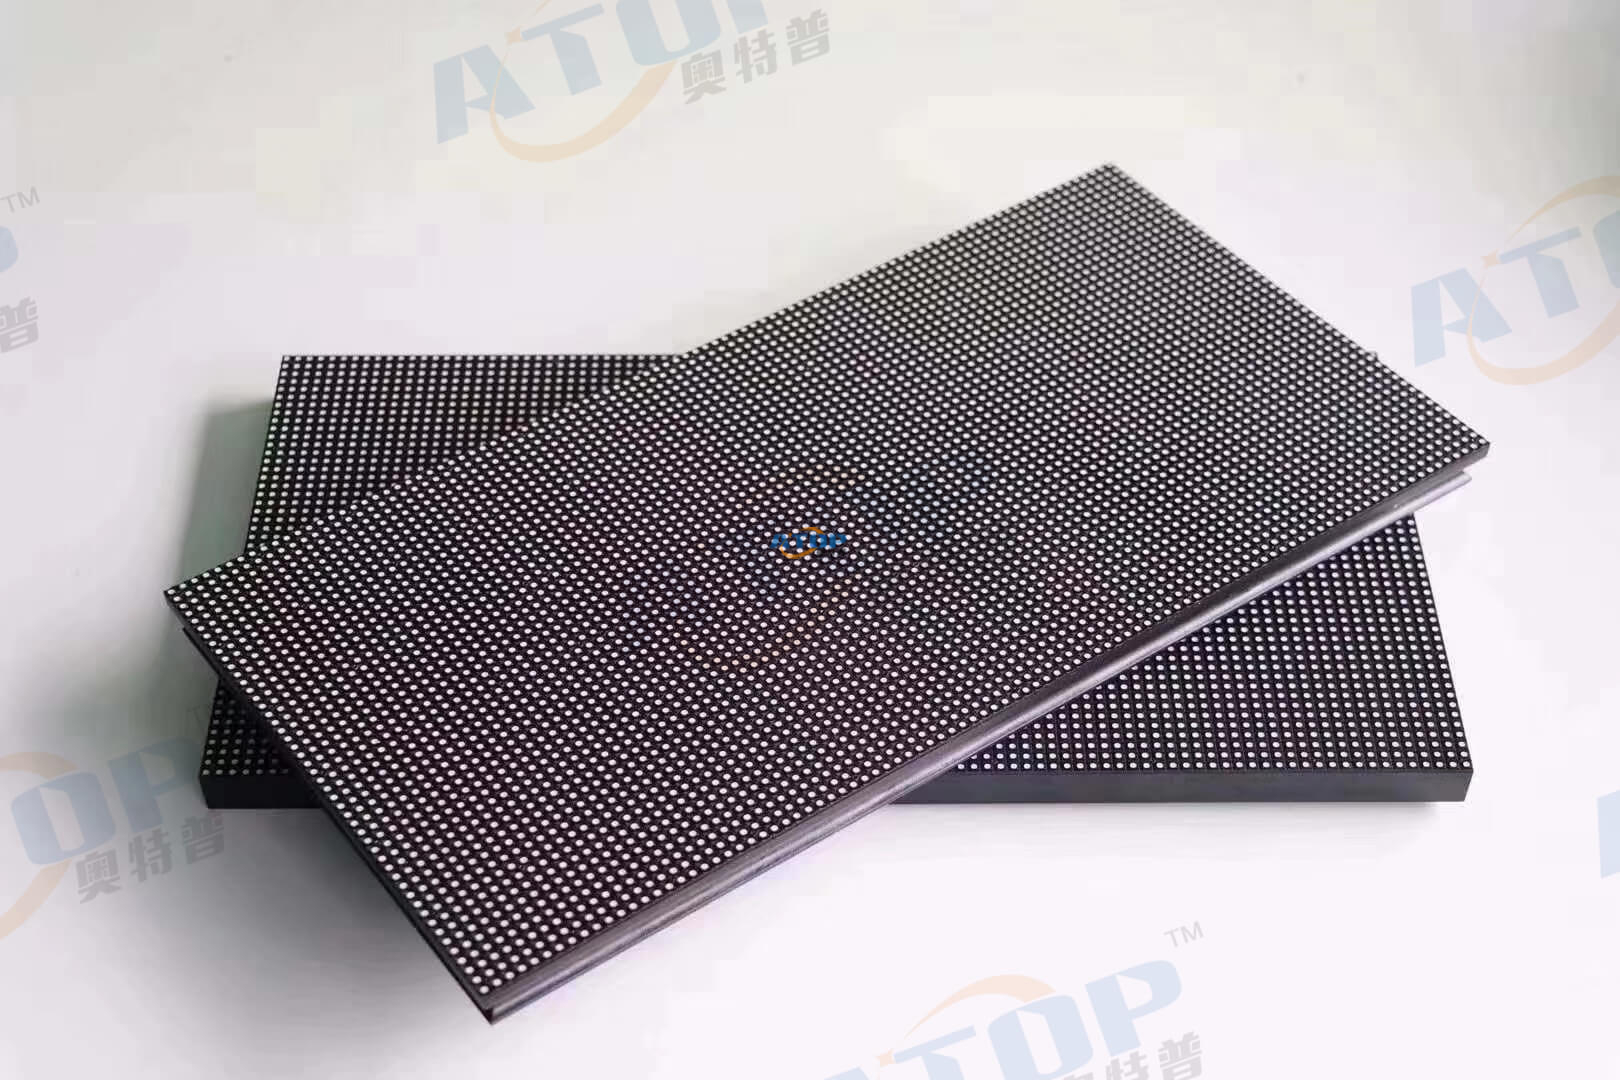 Full color P3.33 outdoor led module size 320x160mm